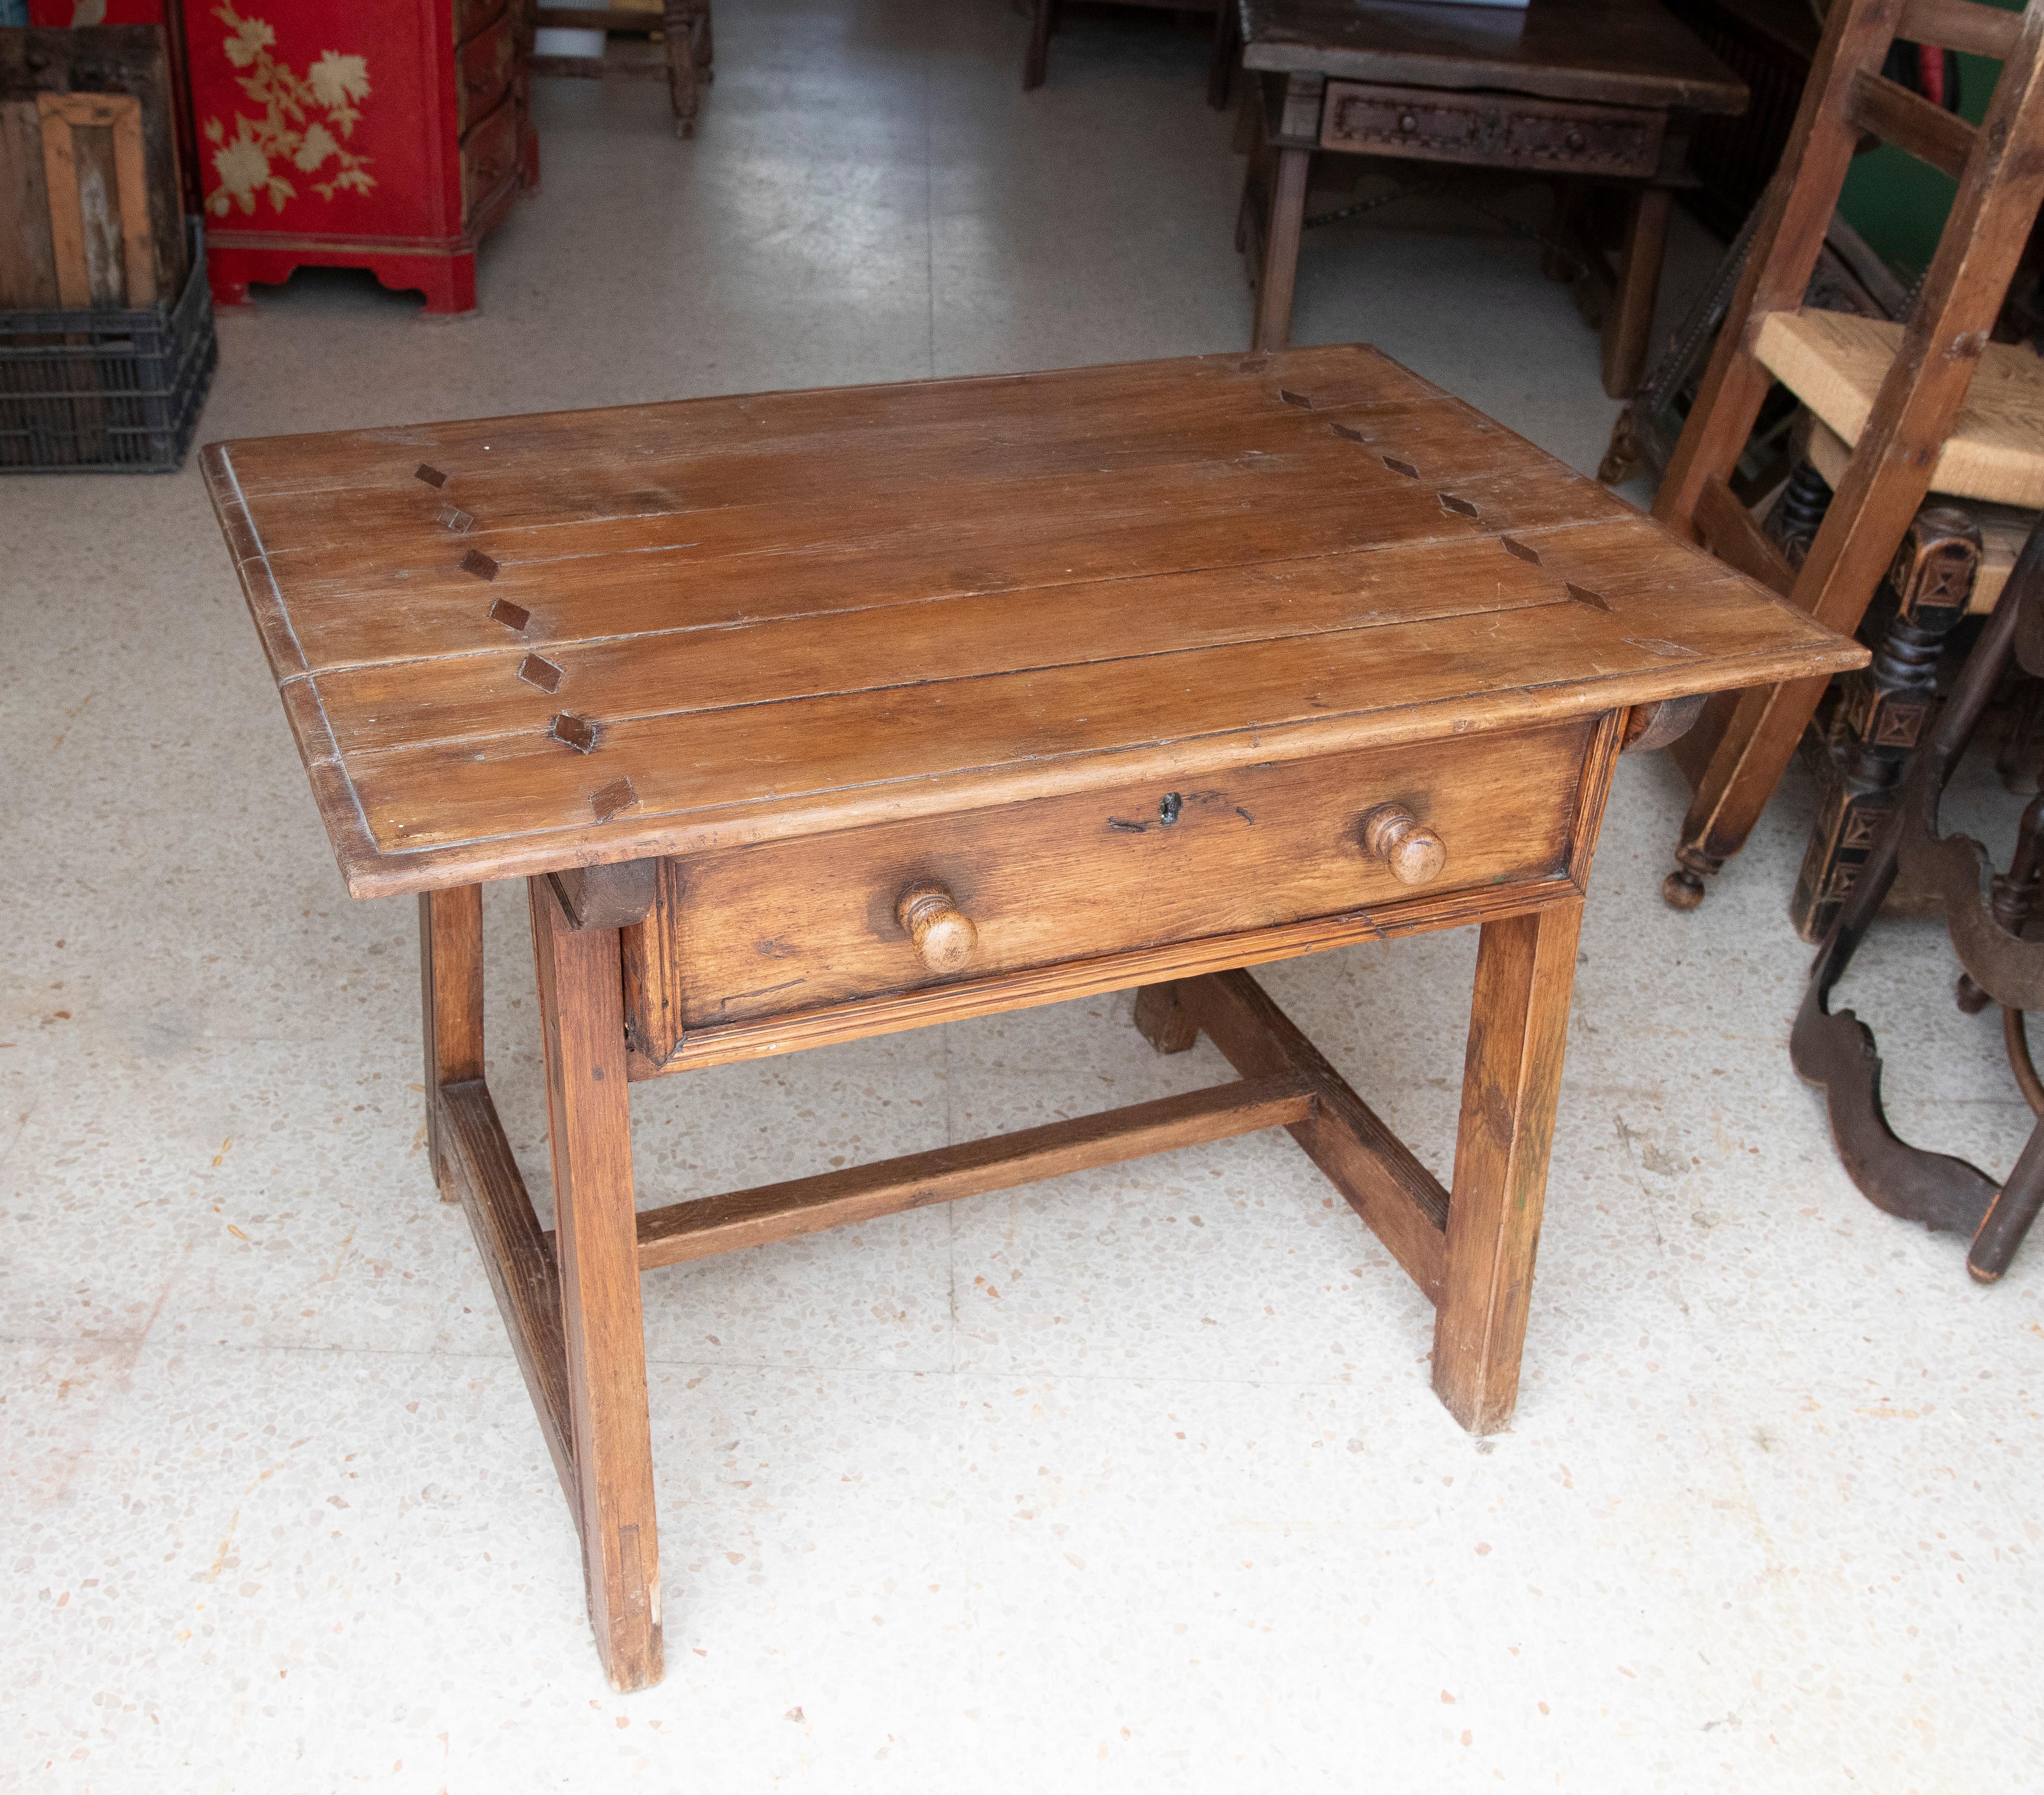 19th Century Spanish kitchen work table with drawer and iron decorations.